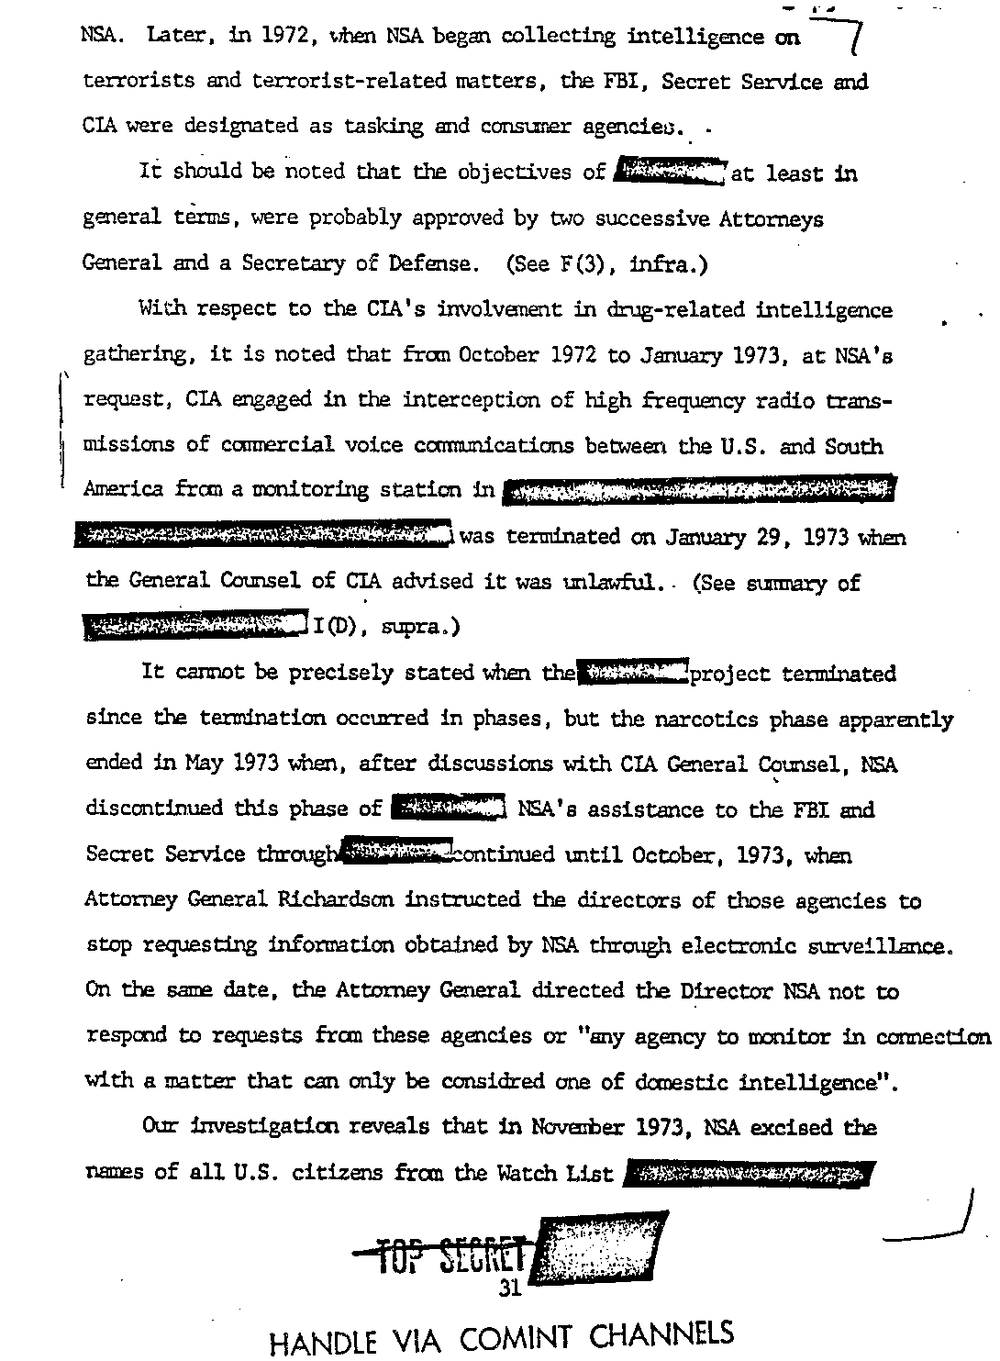 Page 39 from Report on Inquiry Into CIA Related Electronic Surveillance Activities